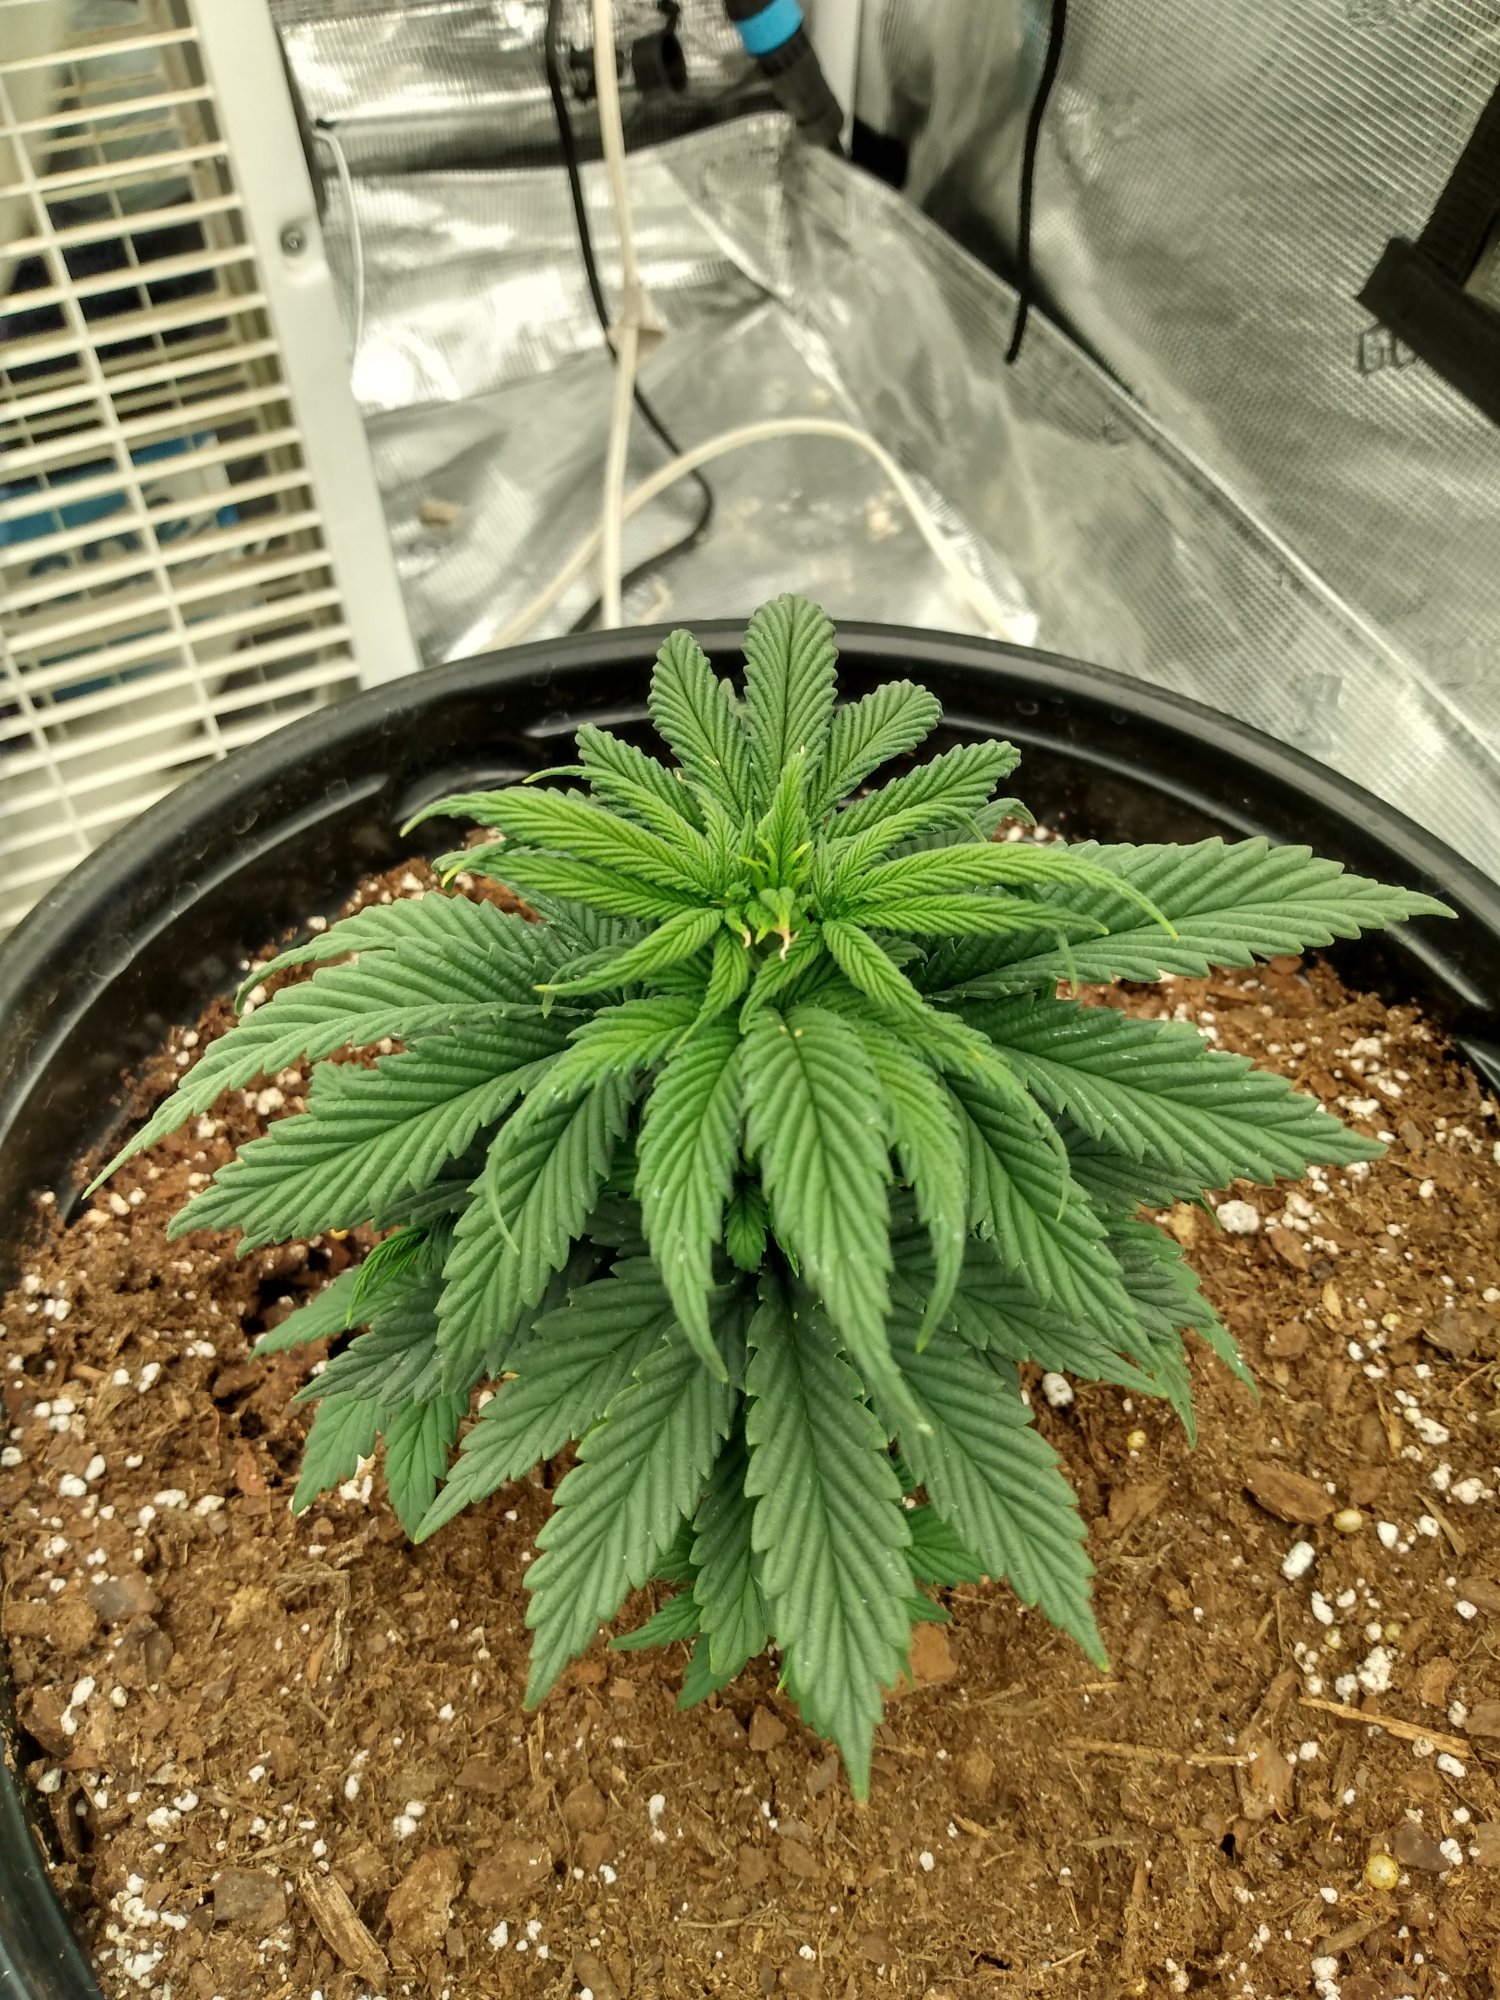 Help with 1st time grow